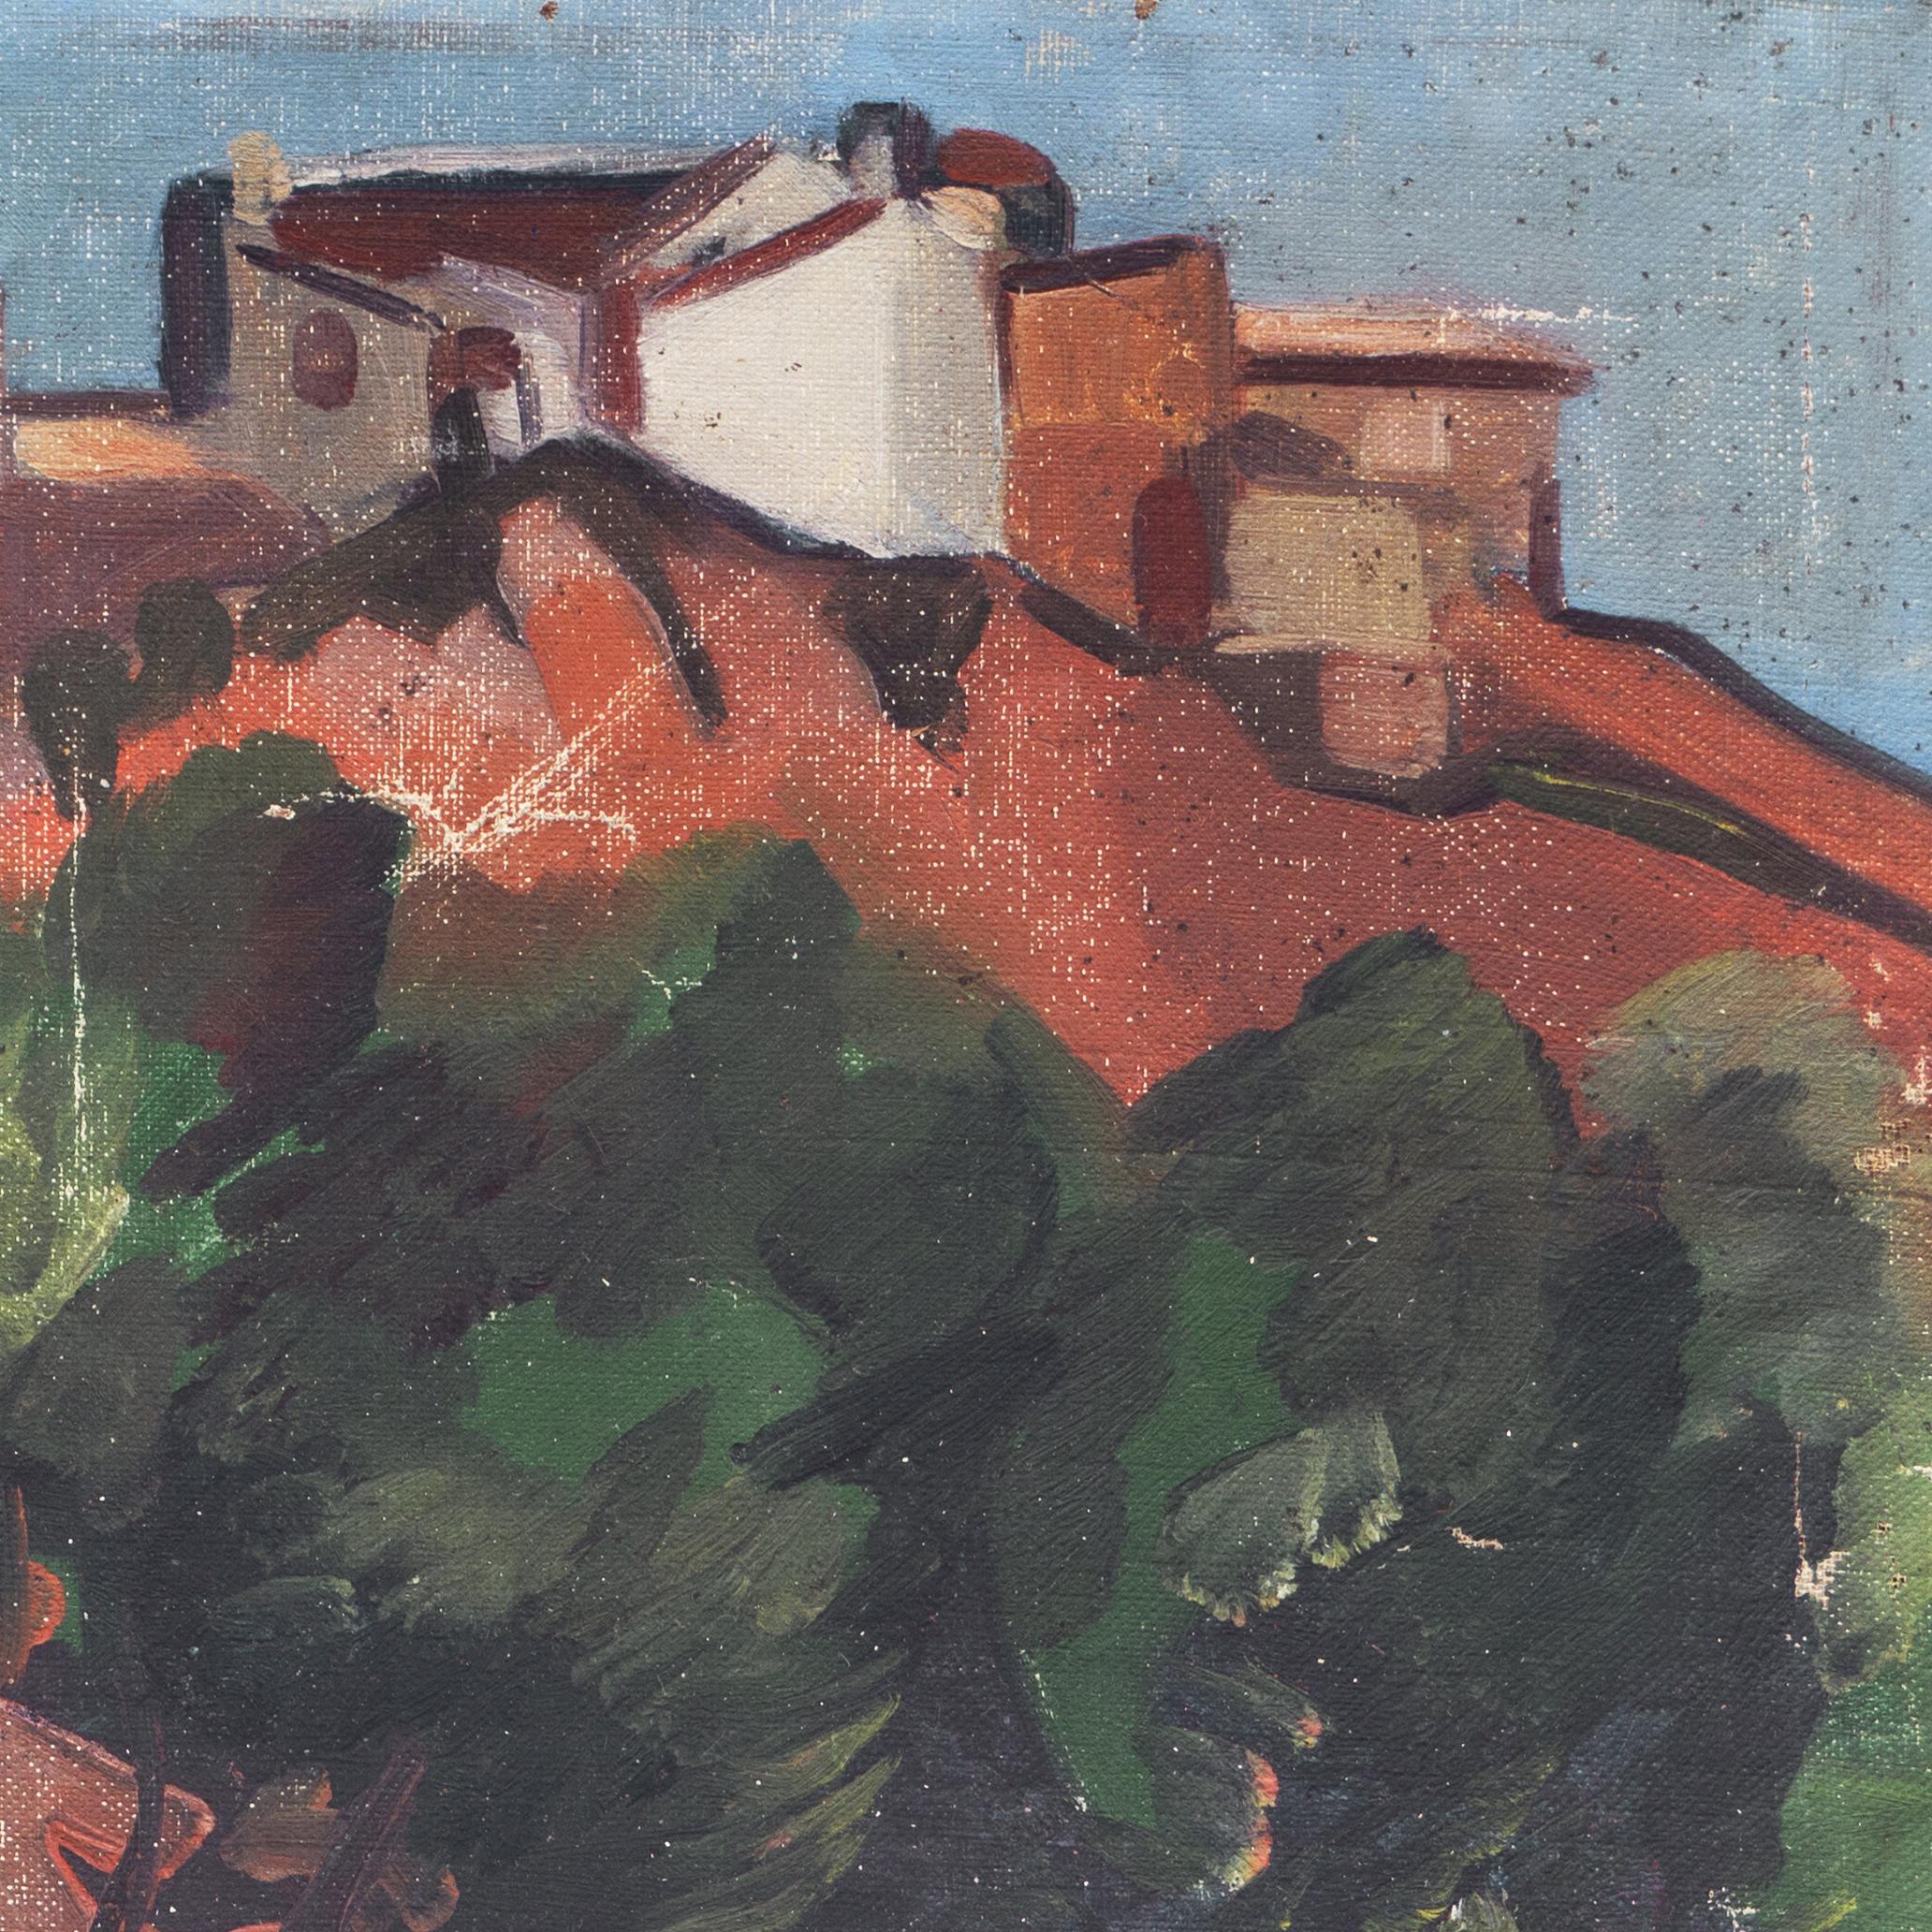 Signed indistinctly lower center and painted circa 1900.

An early twentieth-century, Post-Impressionist landscape showing a view of an ancient Provençale hill town, possibly Roussillon, overlooking a verdant valley. An attractively composed and